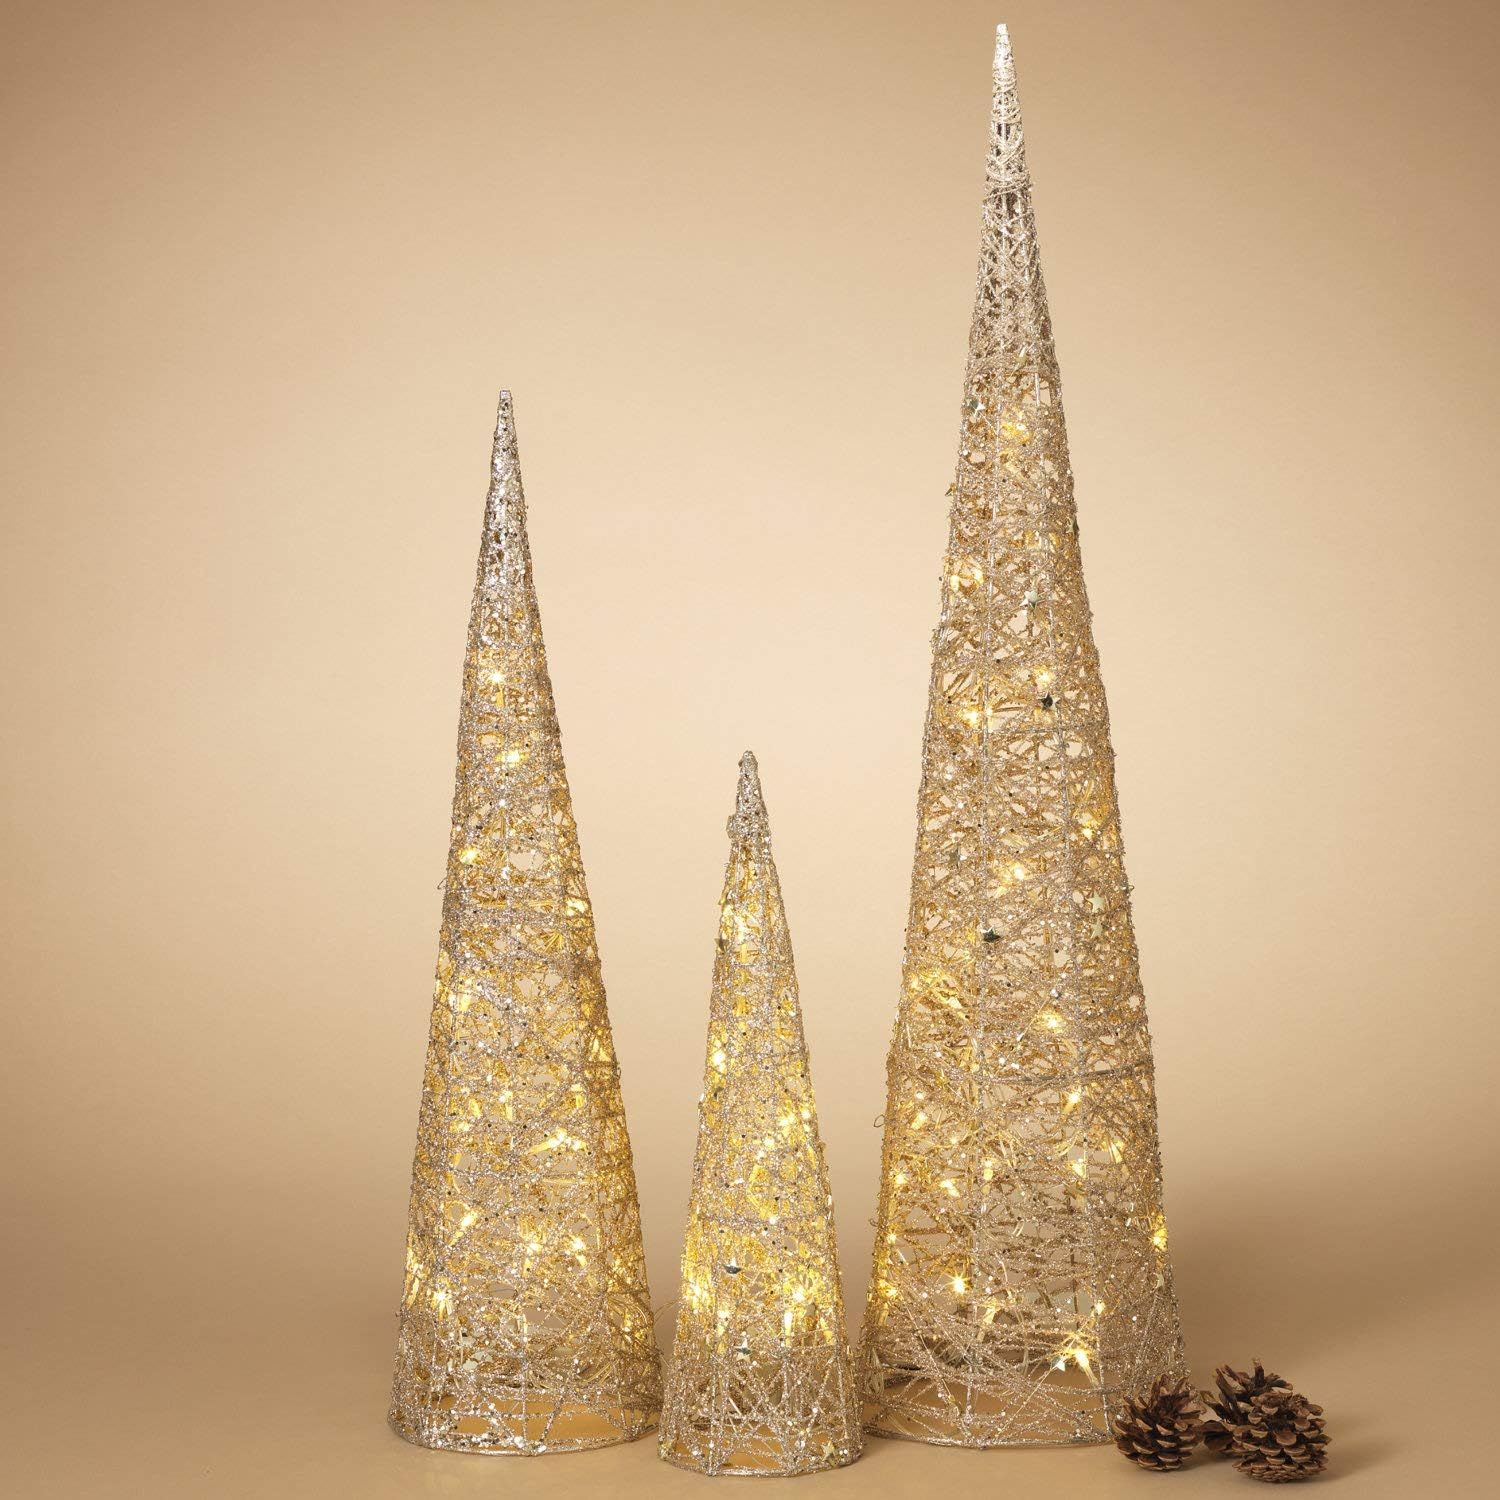 One Holiday Way LED Lighted Set of 3 Gold Glitter Cone Christmas Trees (32 Inch, 24 Inch, 16 Inch) - | Amazon (US)